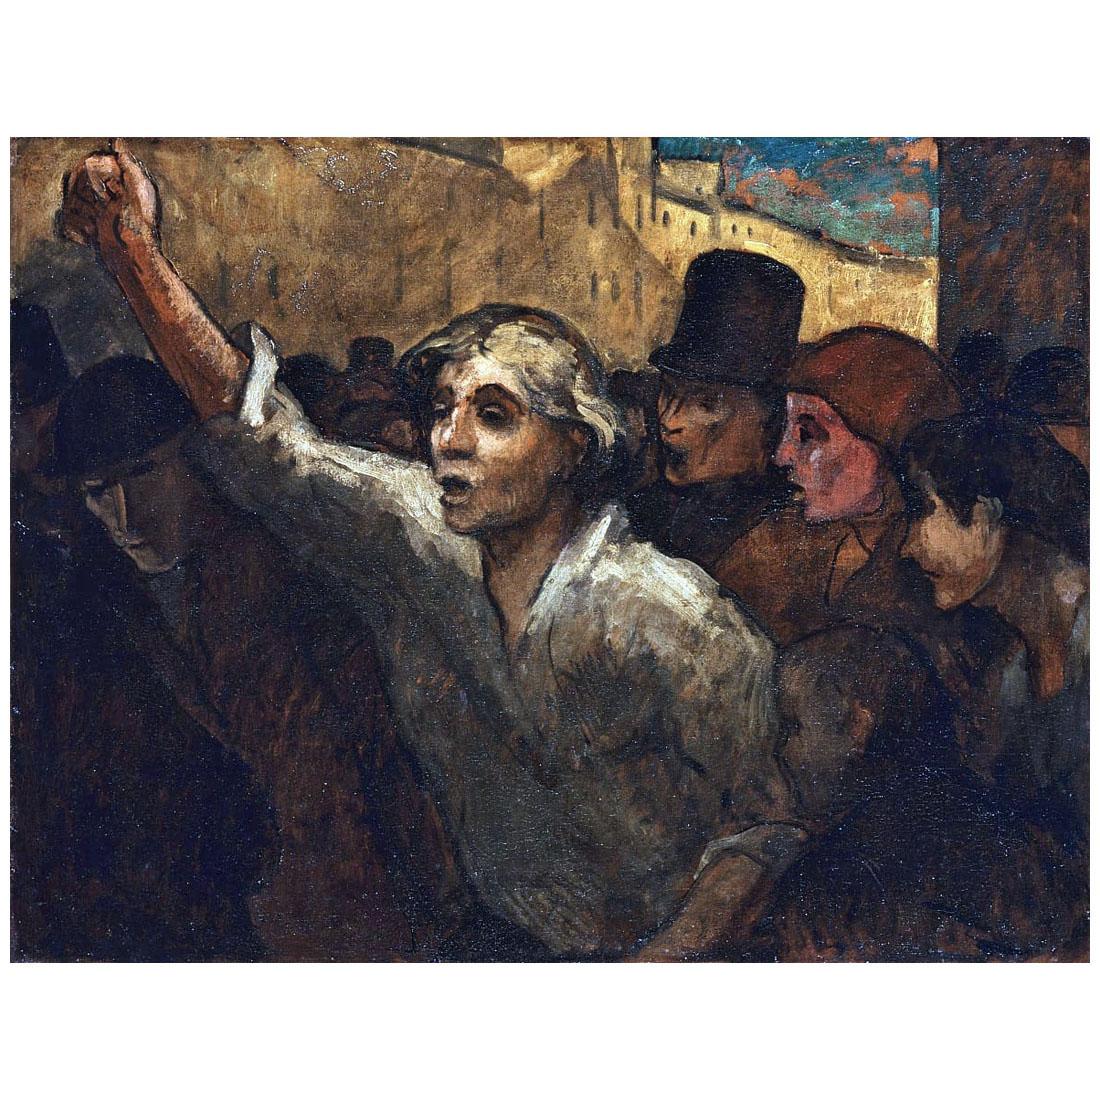 Honore Daumier. L’Emeute. 1848. Philips Collection